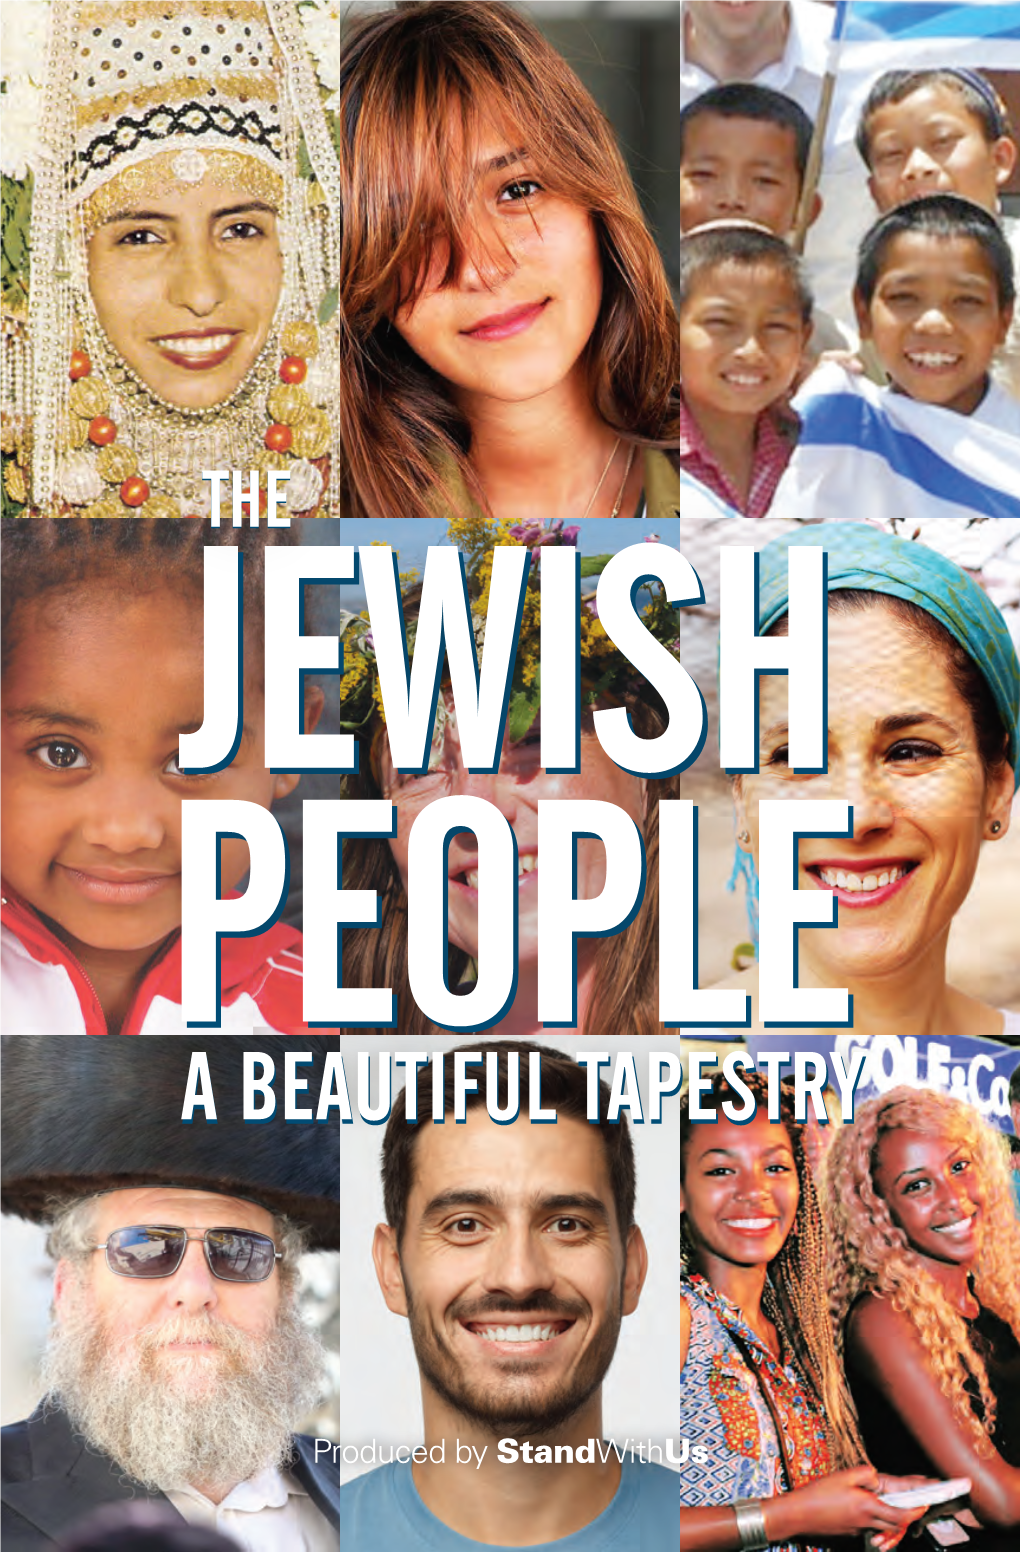 A Tapestry of Jews Around the World